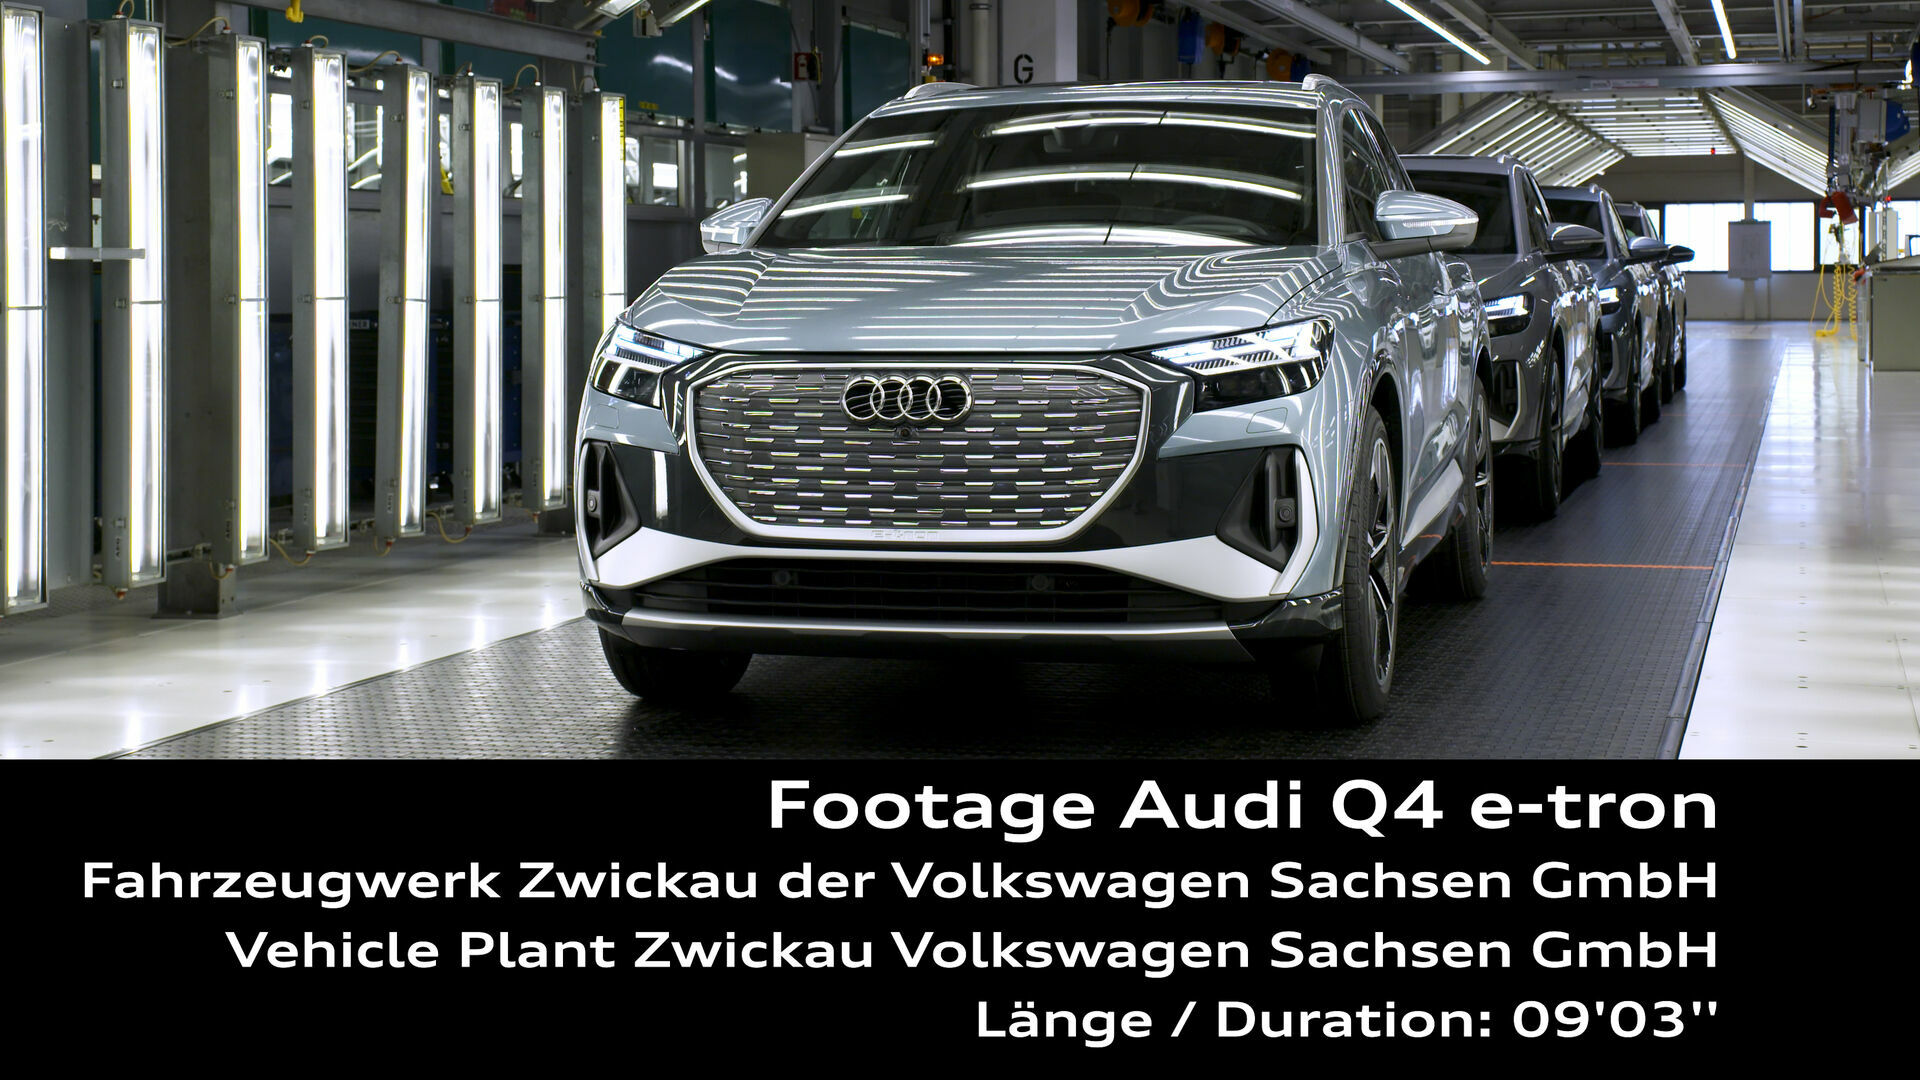 Footage: the production of the Audi Q4 e-tron